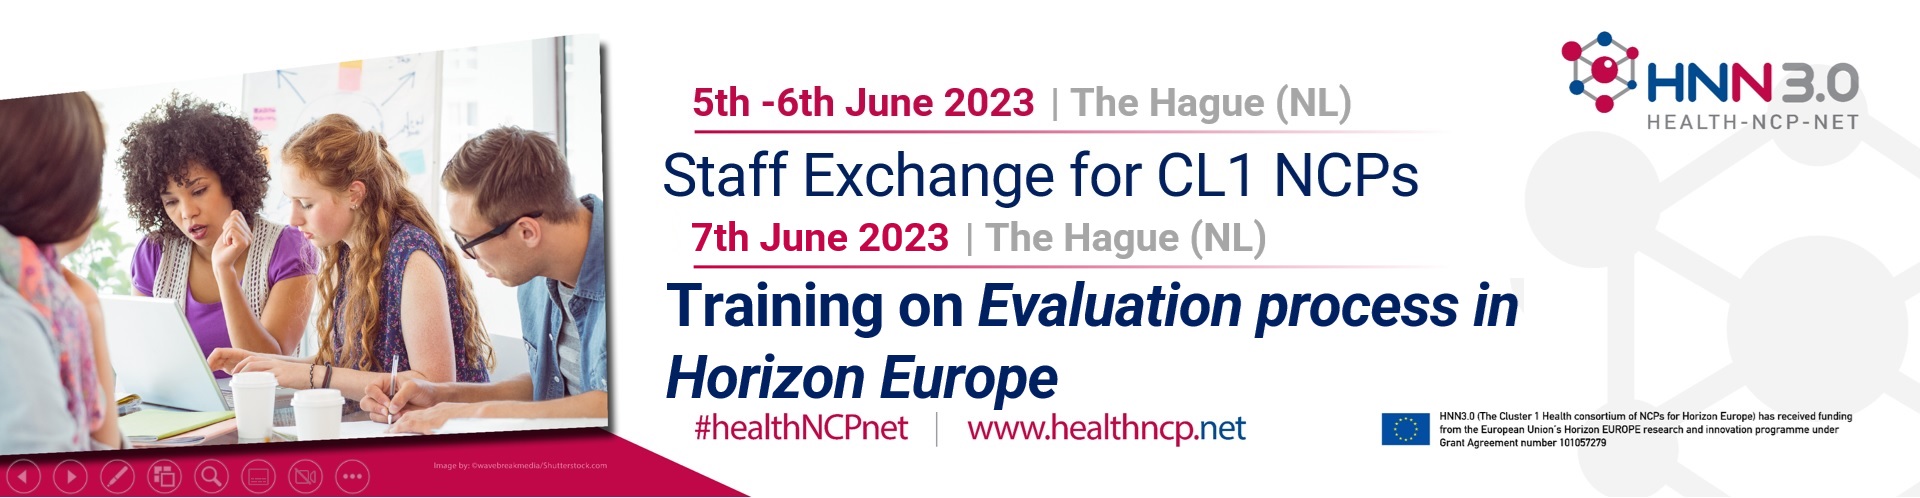 HNN Training and Staffe Exchange Banner